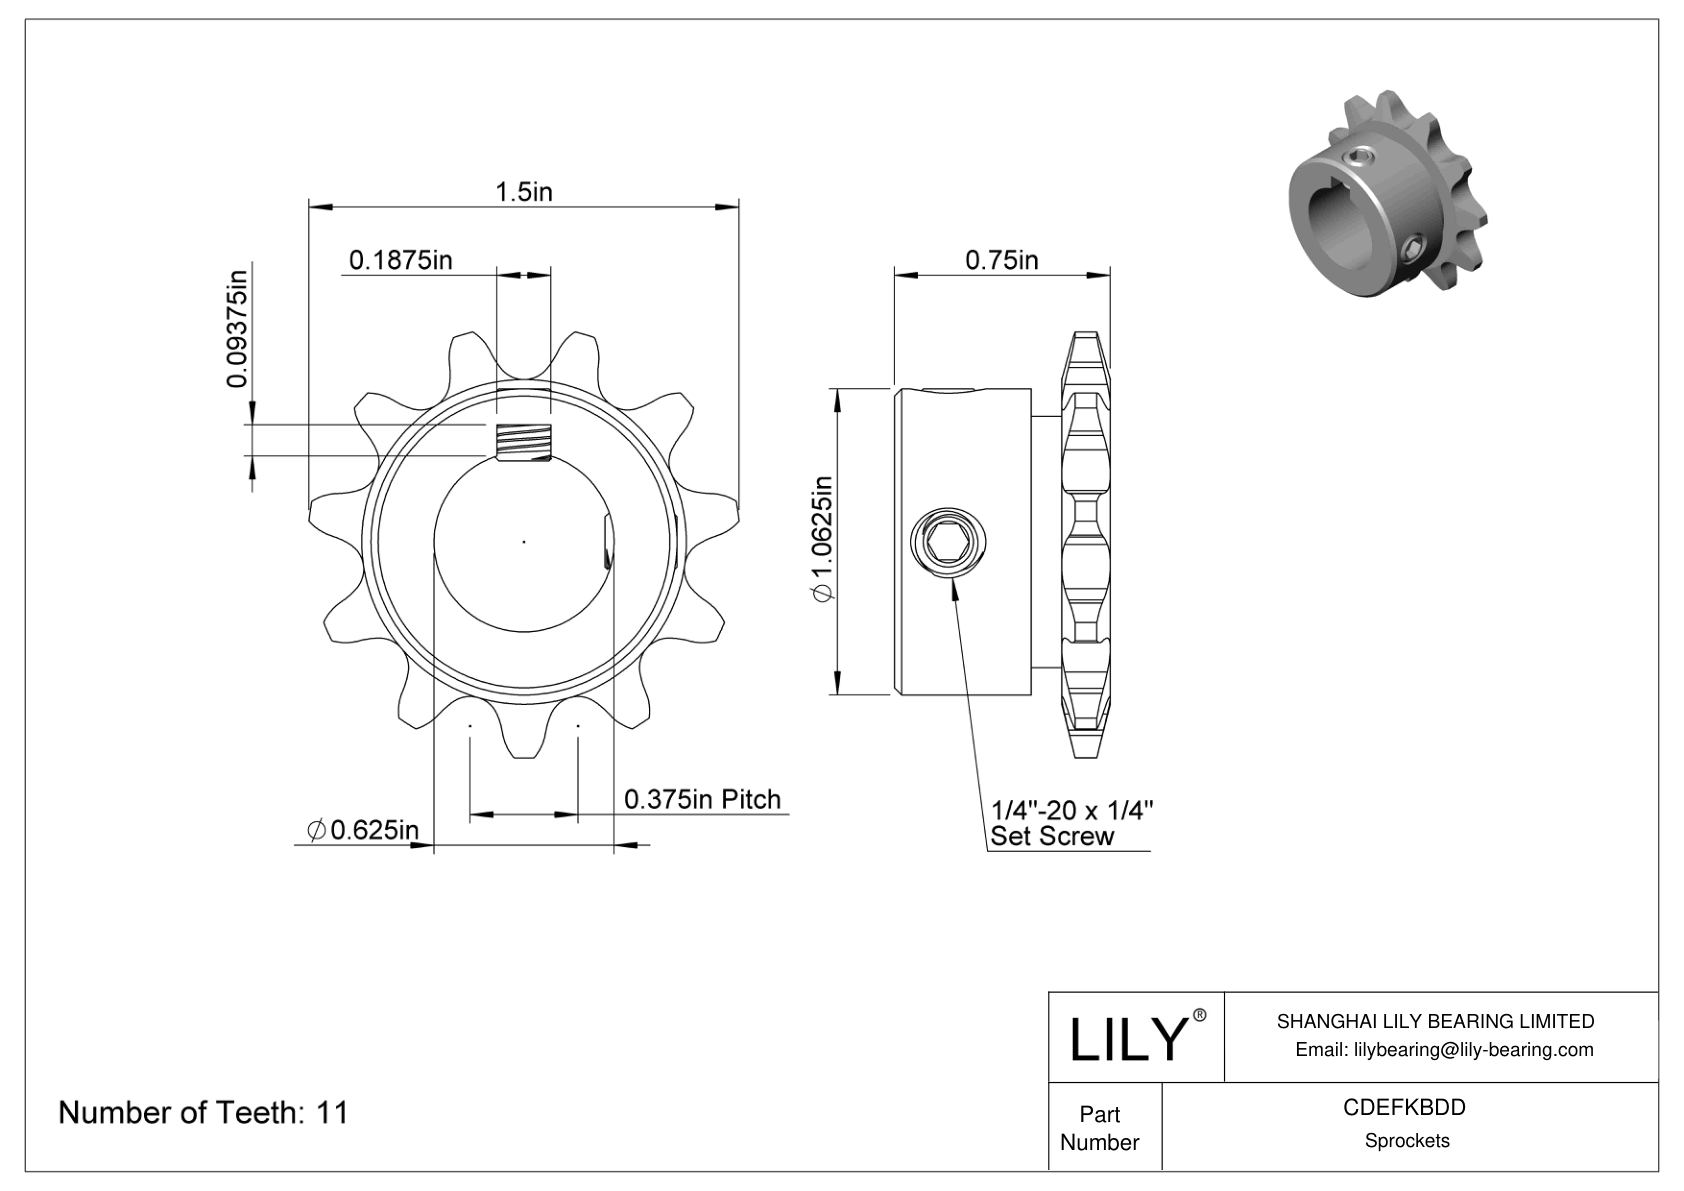 CDEFKBDD Corrosion-Resistant Sprockets for ANSI Roller Chain cad drawing